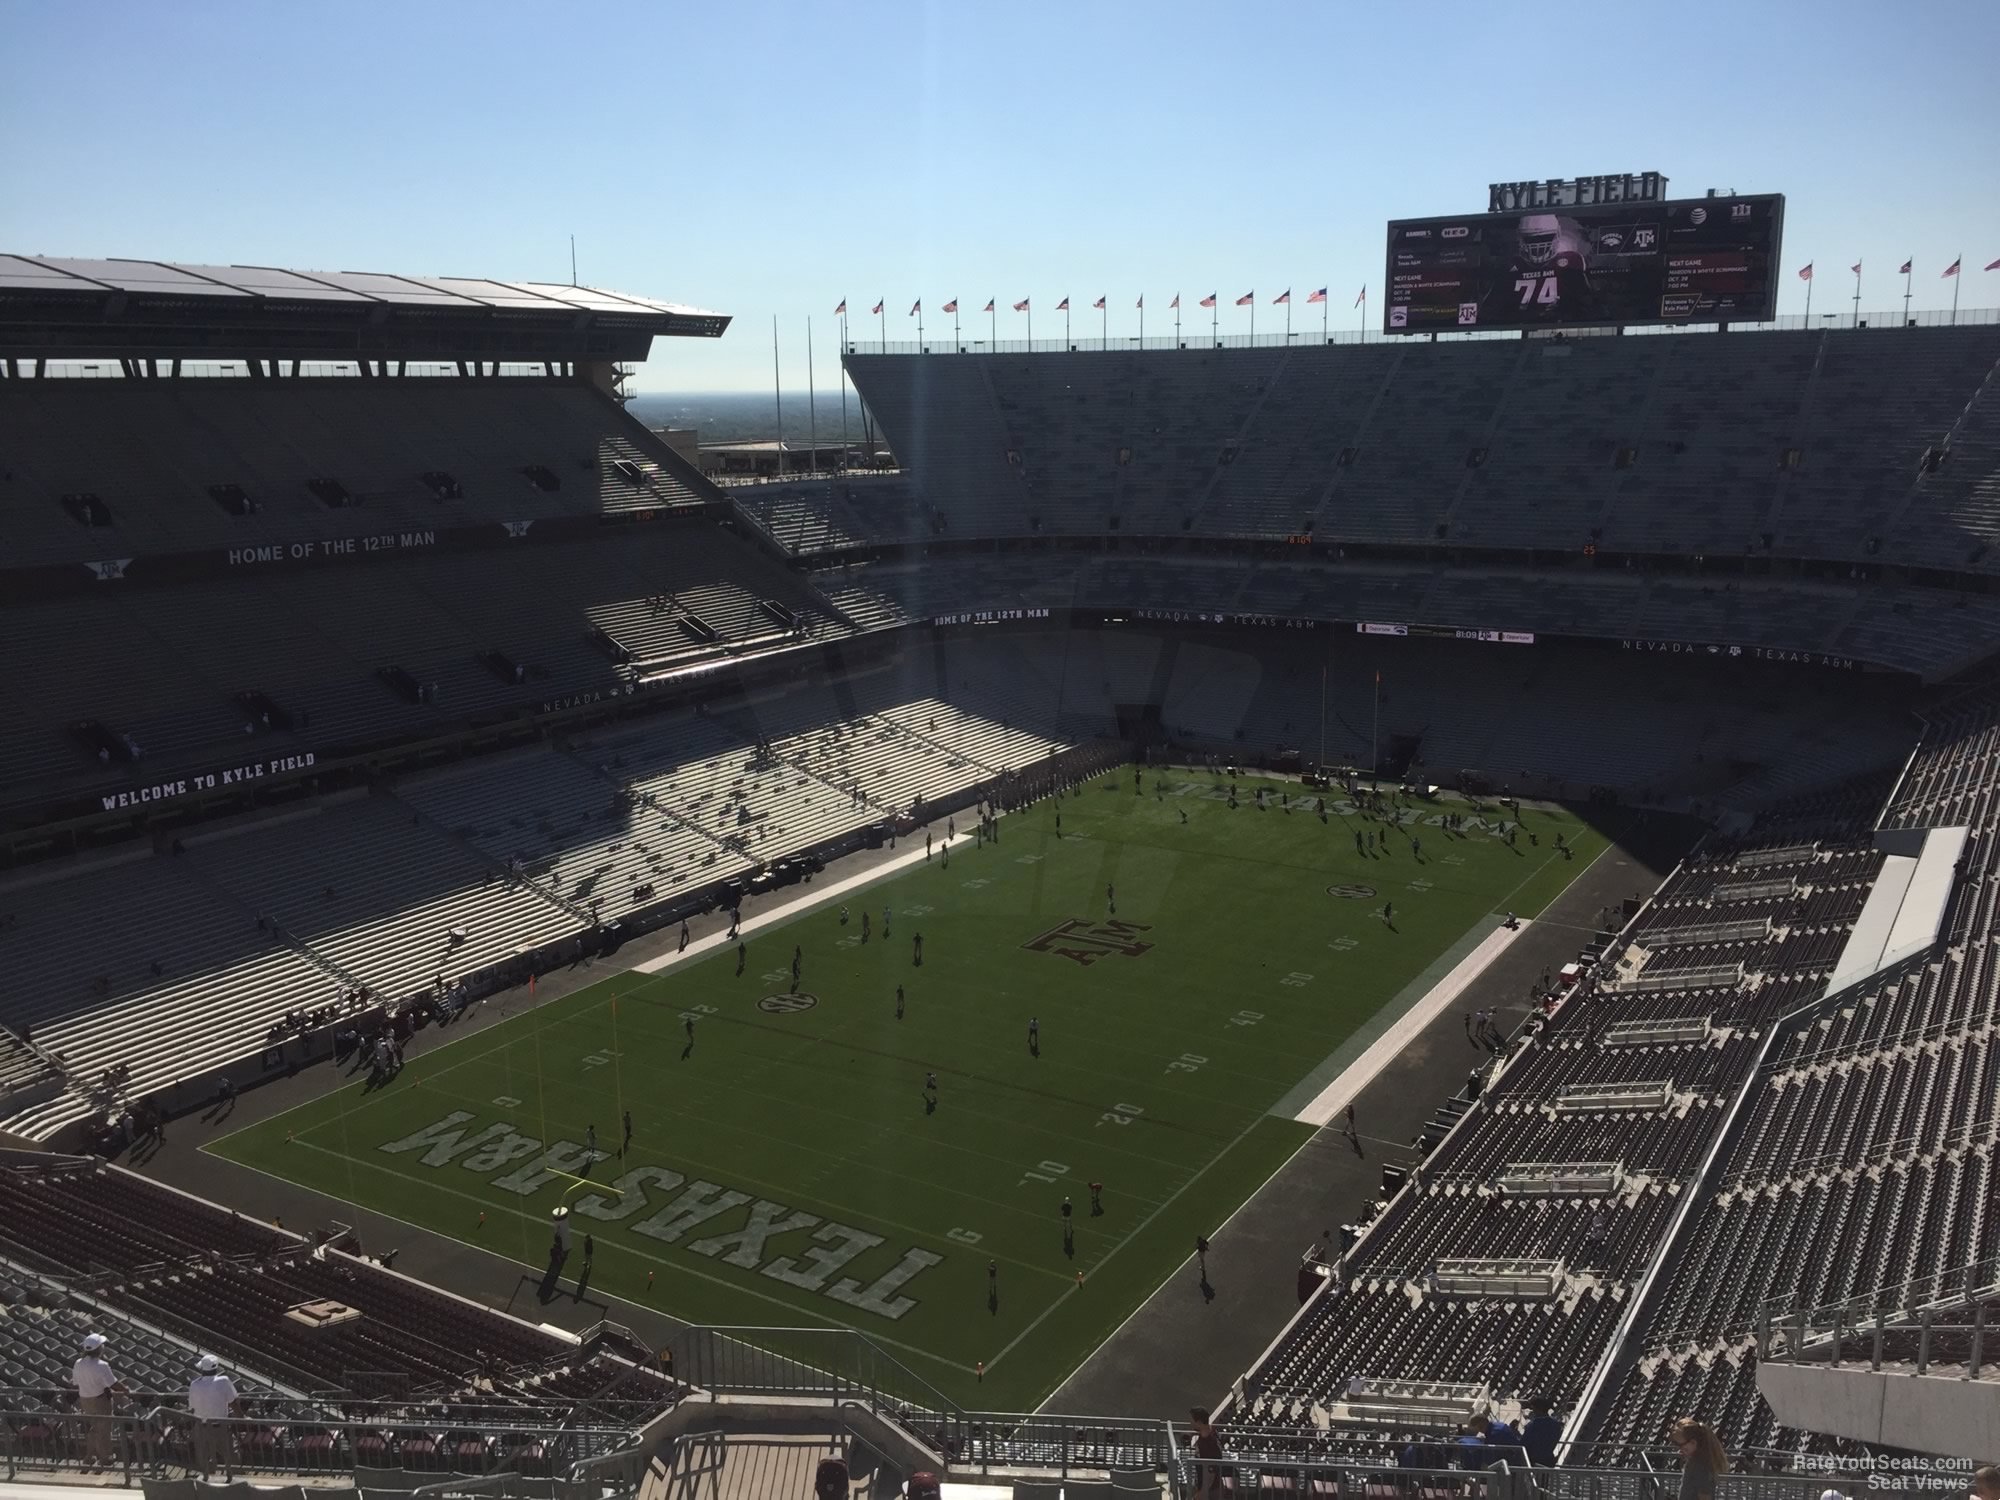 section 409, row 20 seat view  - kyle field